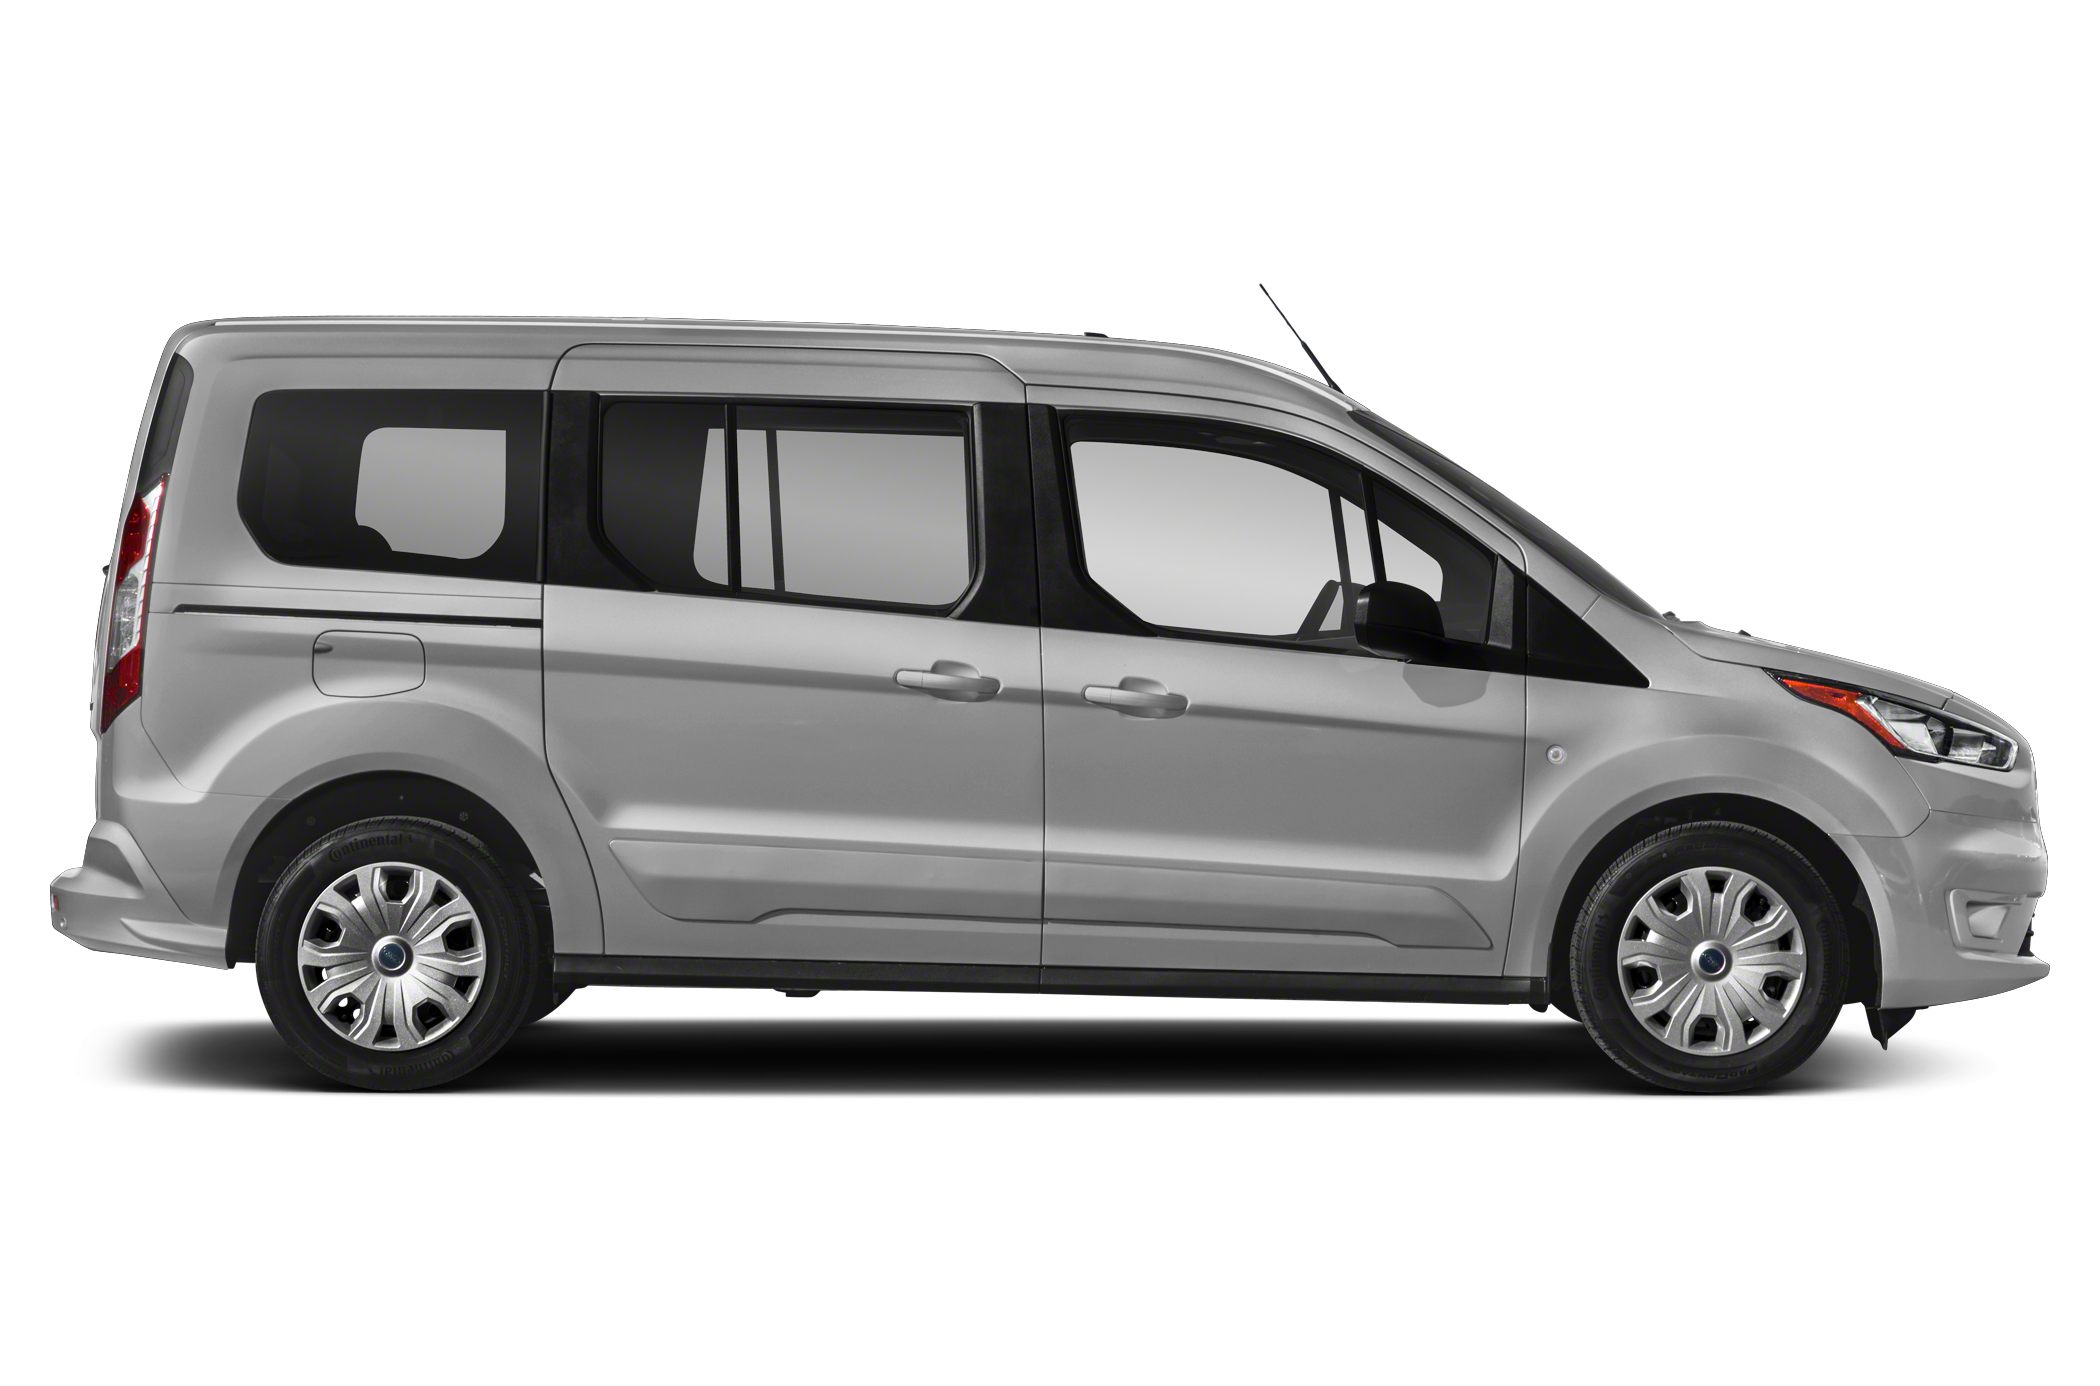 2022 Ford Transit Connect XLT Passenger Wagon LWB Pictures